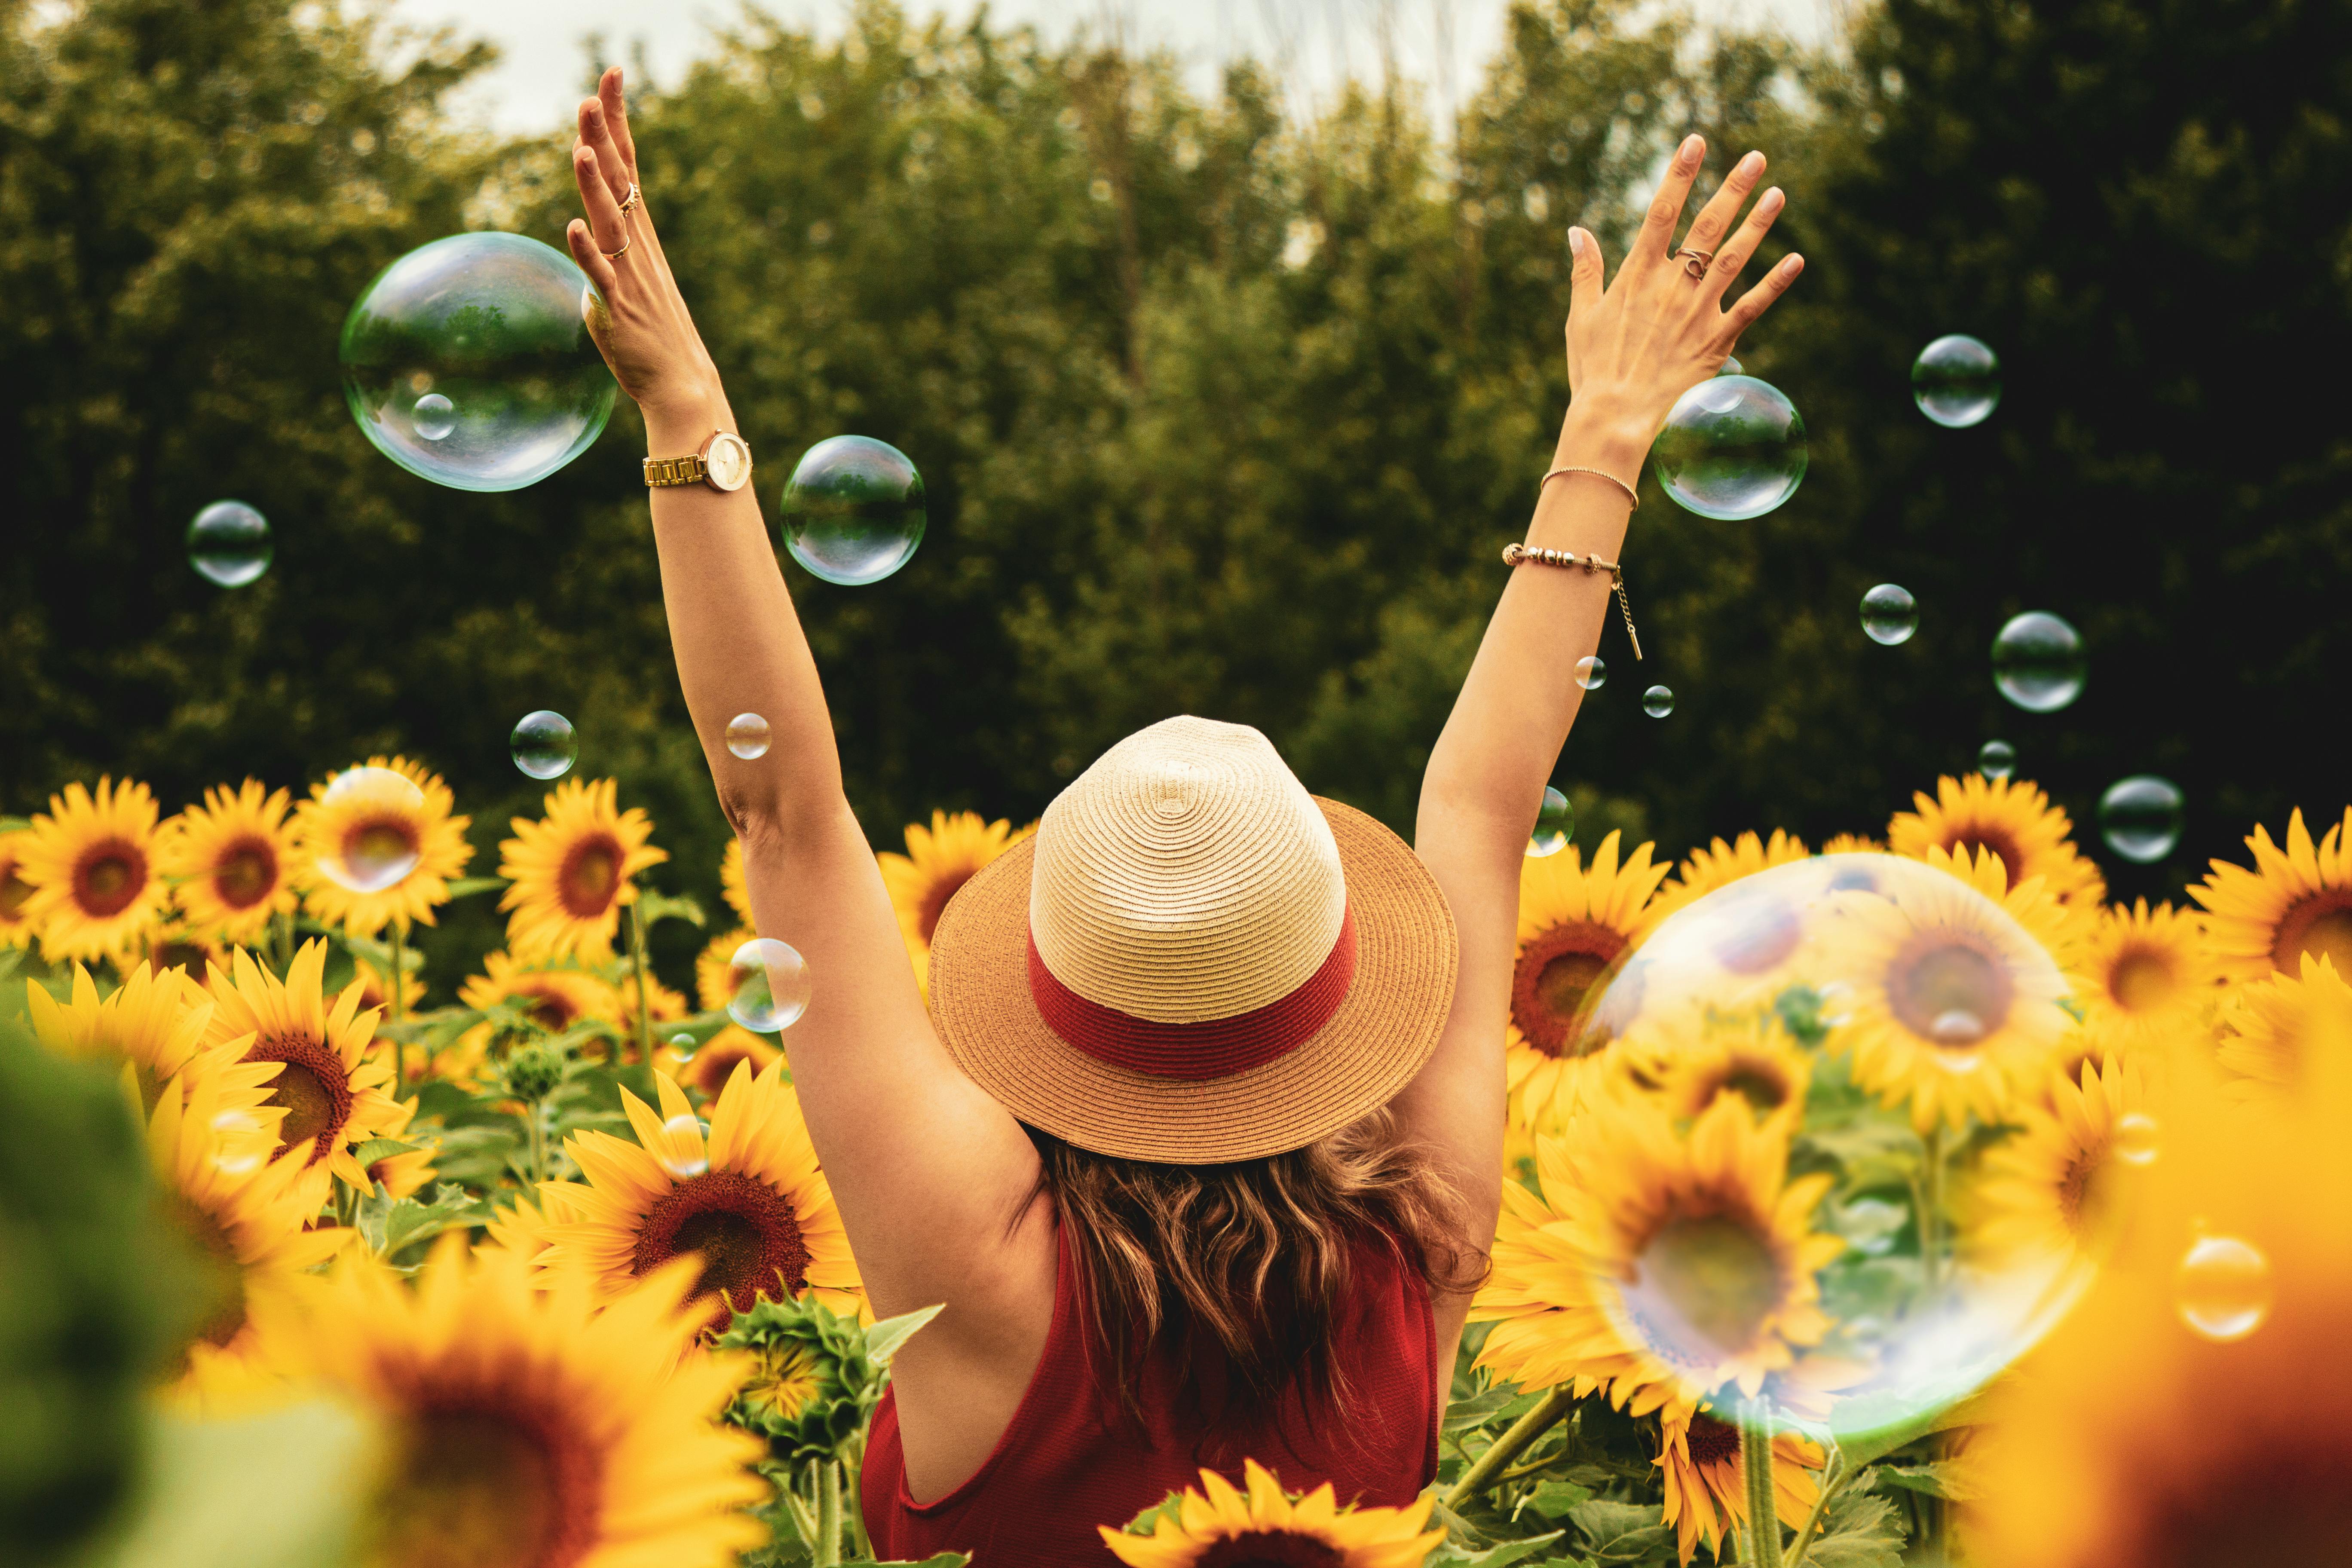 A happy woman in a field of sunflowers | Source: Pexels